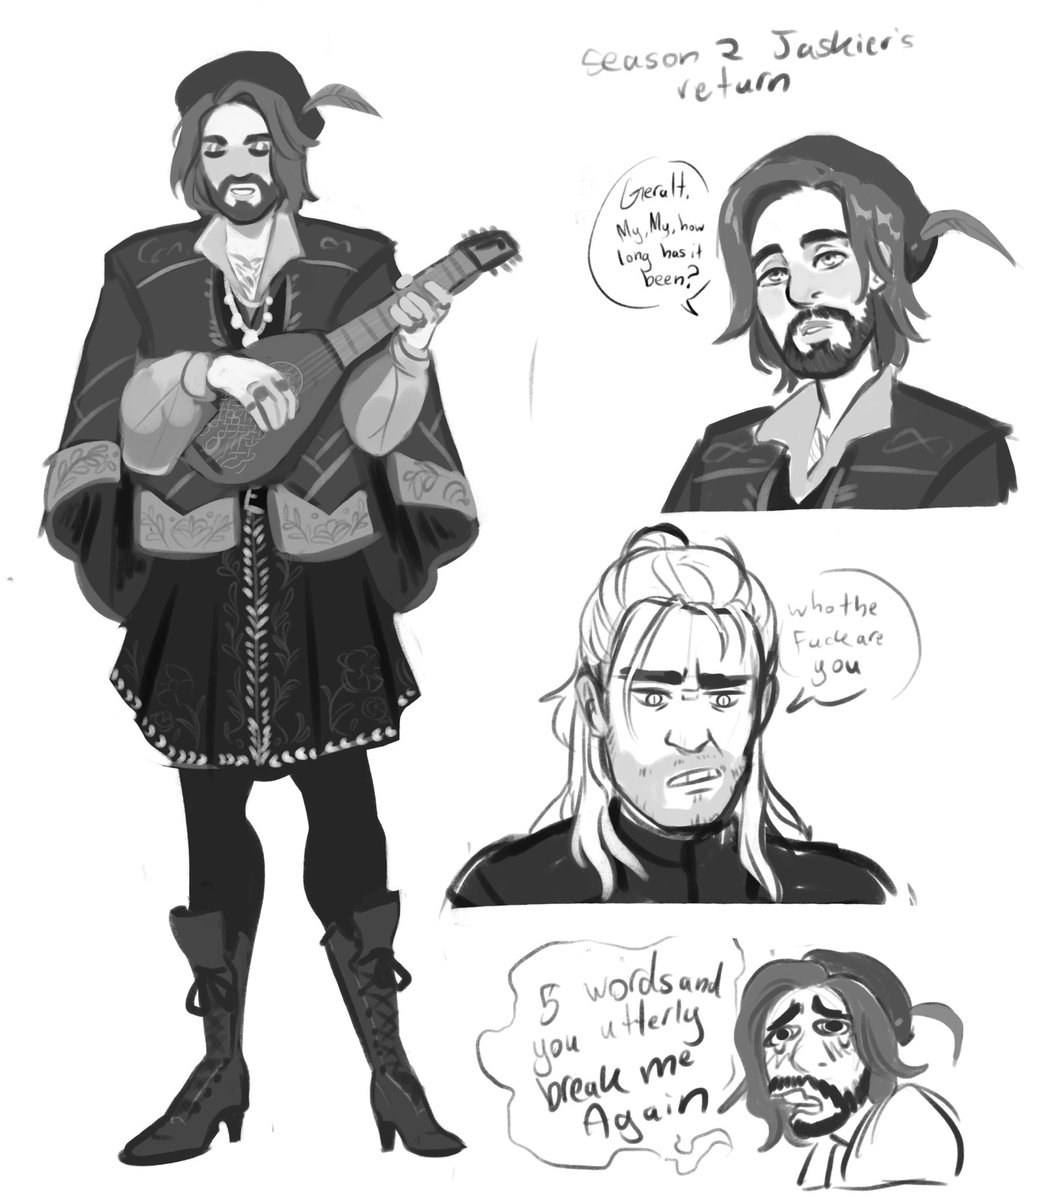 I saw joey batey with longer hair and a beard and became possessed

I just think it'd be very funny if jaskier came back looking completely different and geralts like. Why do you smell like the bard. Did you steal his clothes 